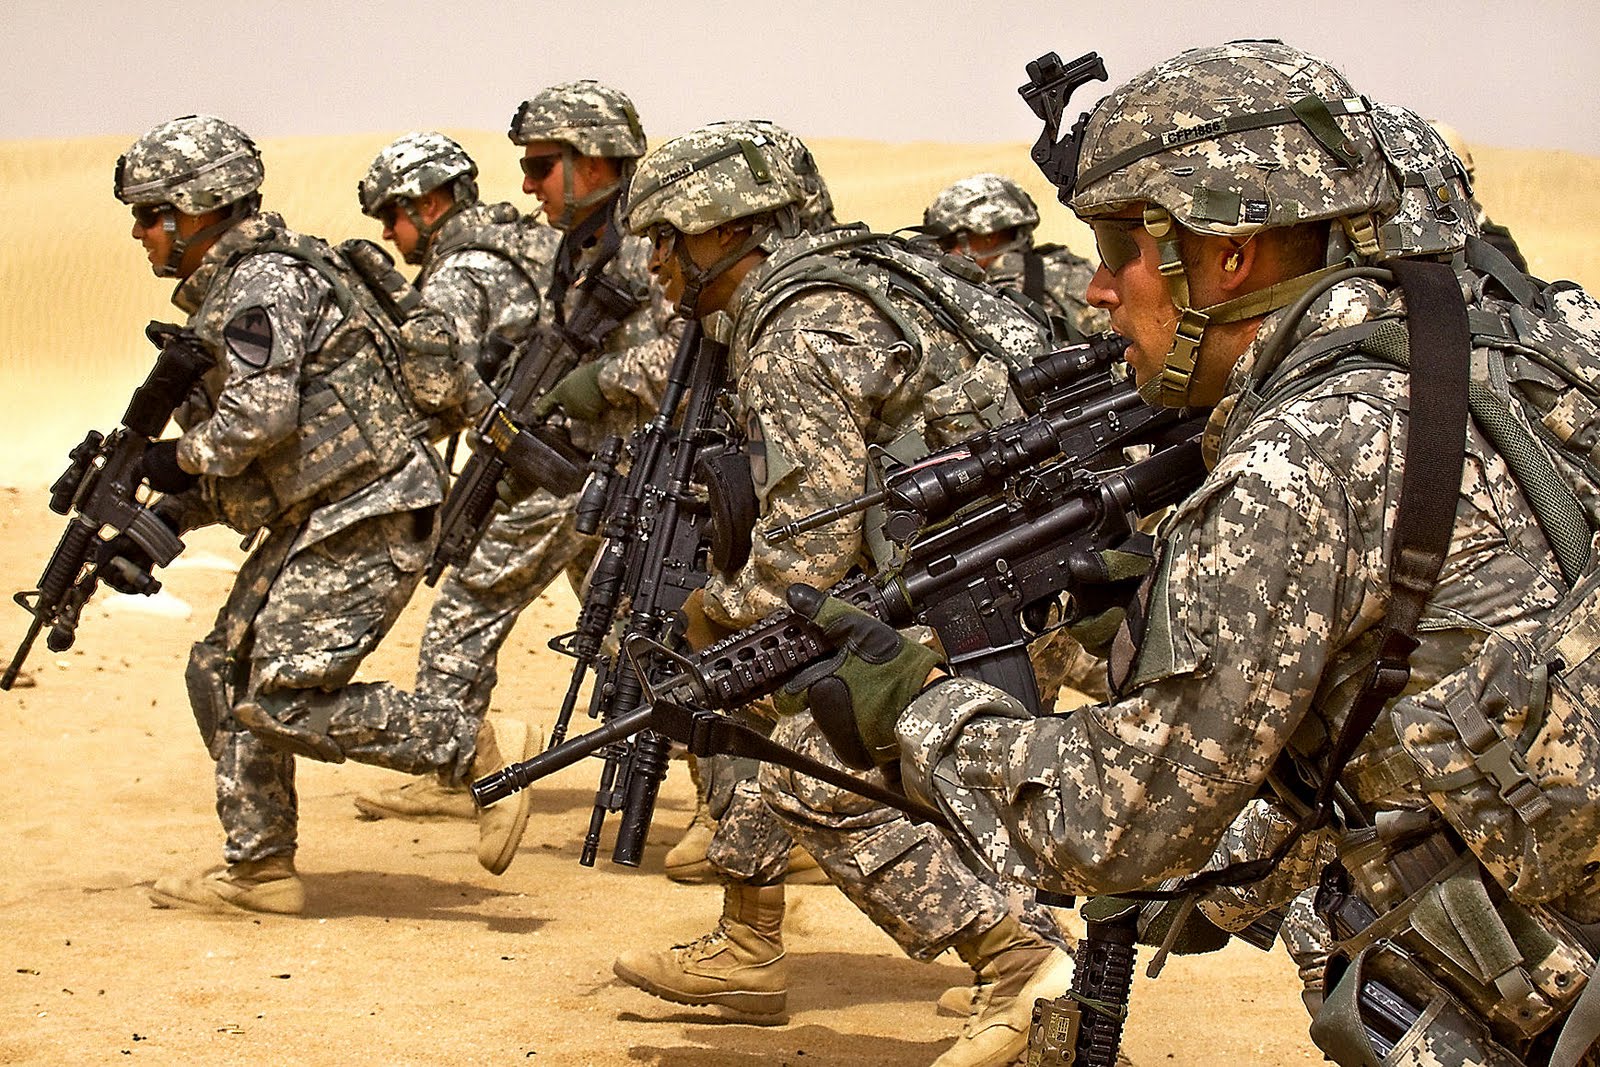 Us Army Soldier Wallpaper - Soldiers Going To War - HD Wallpaper 